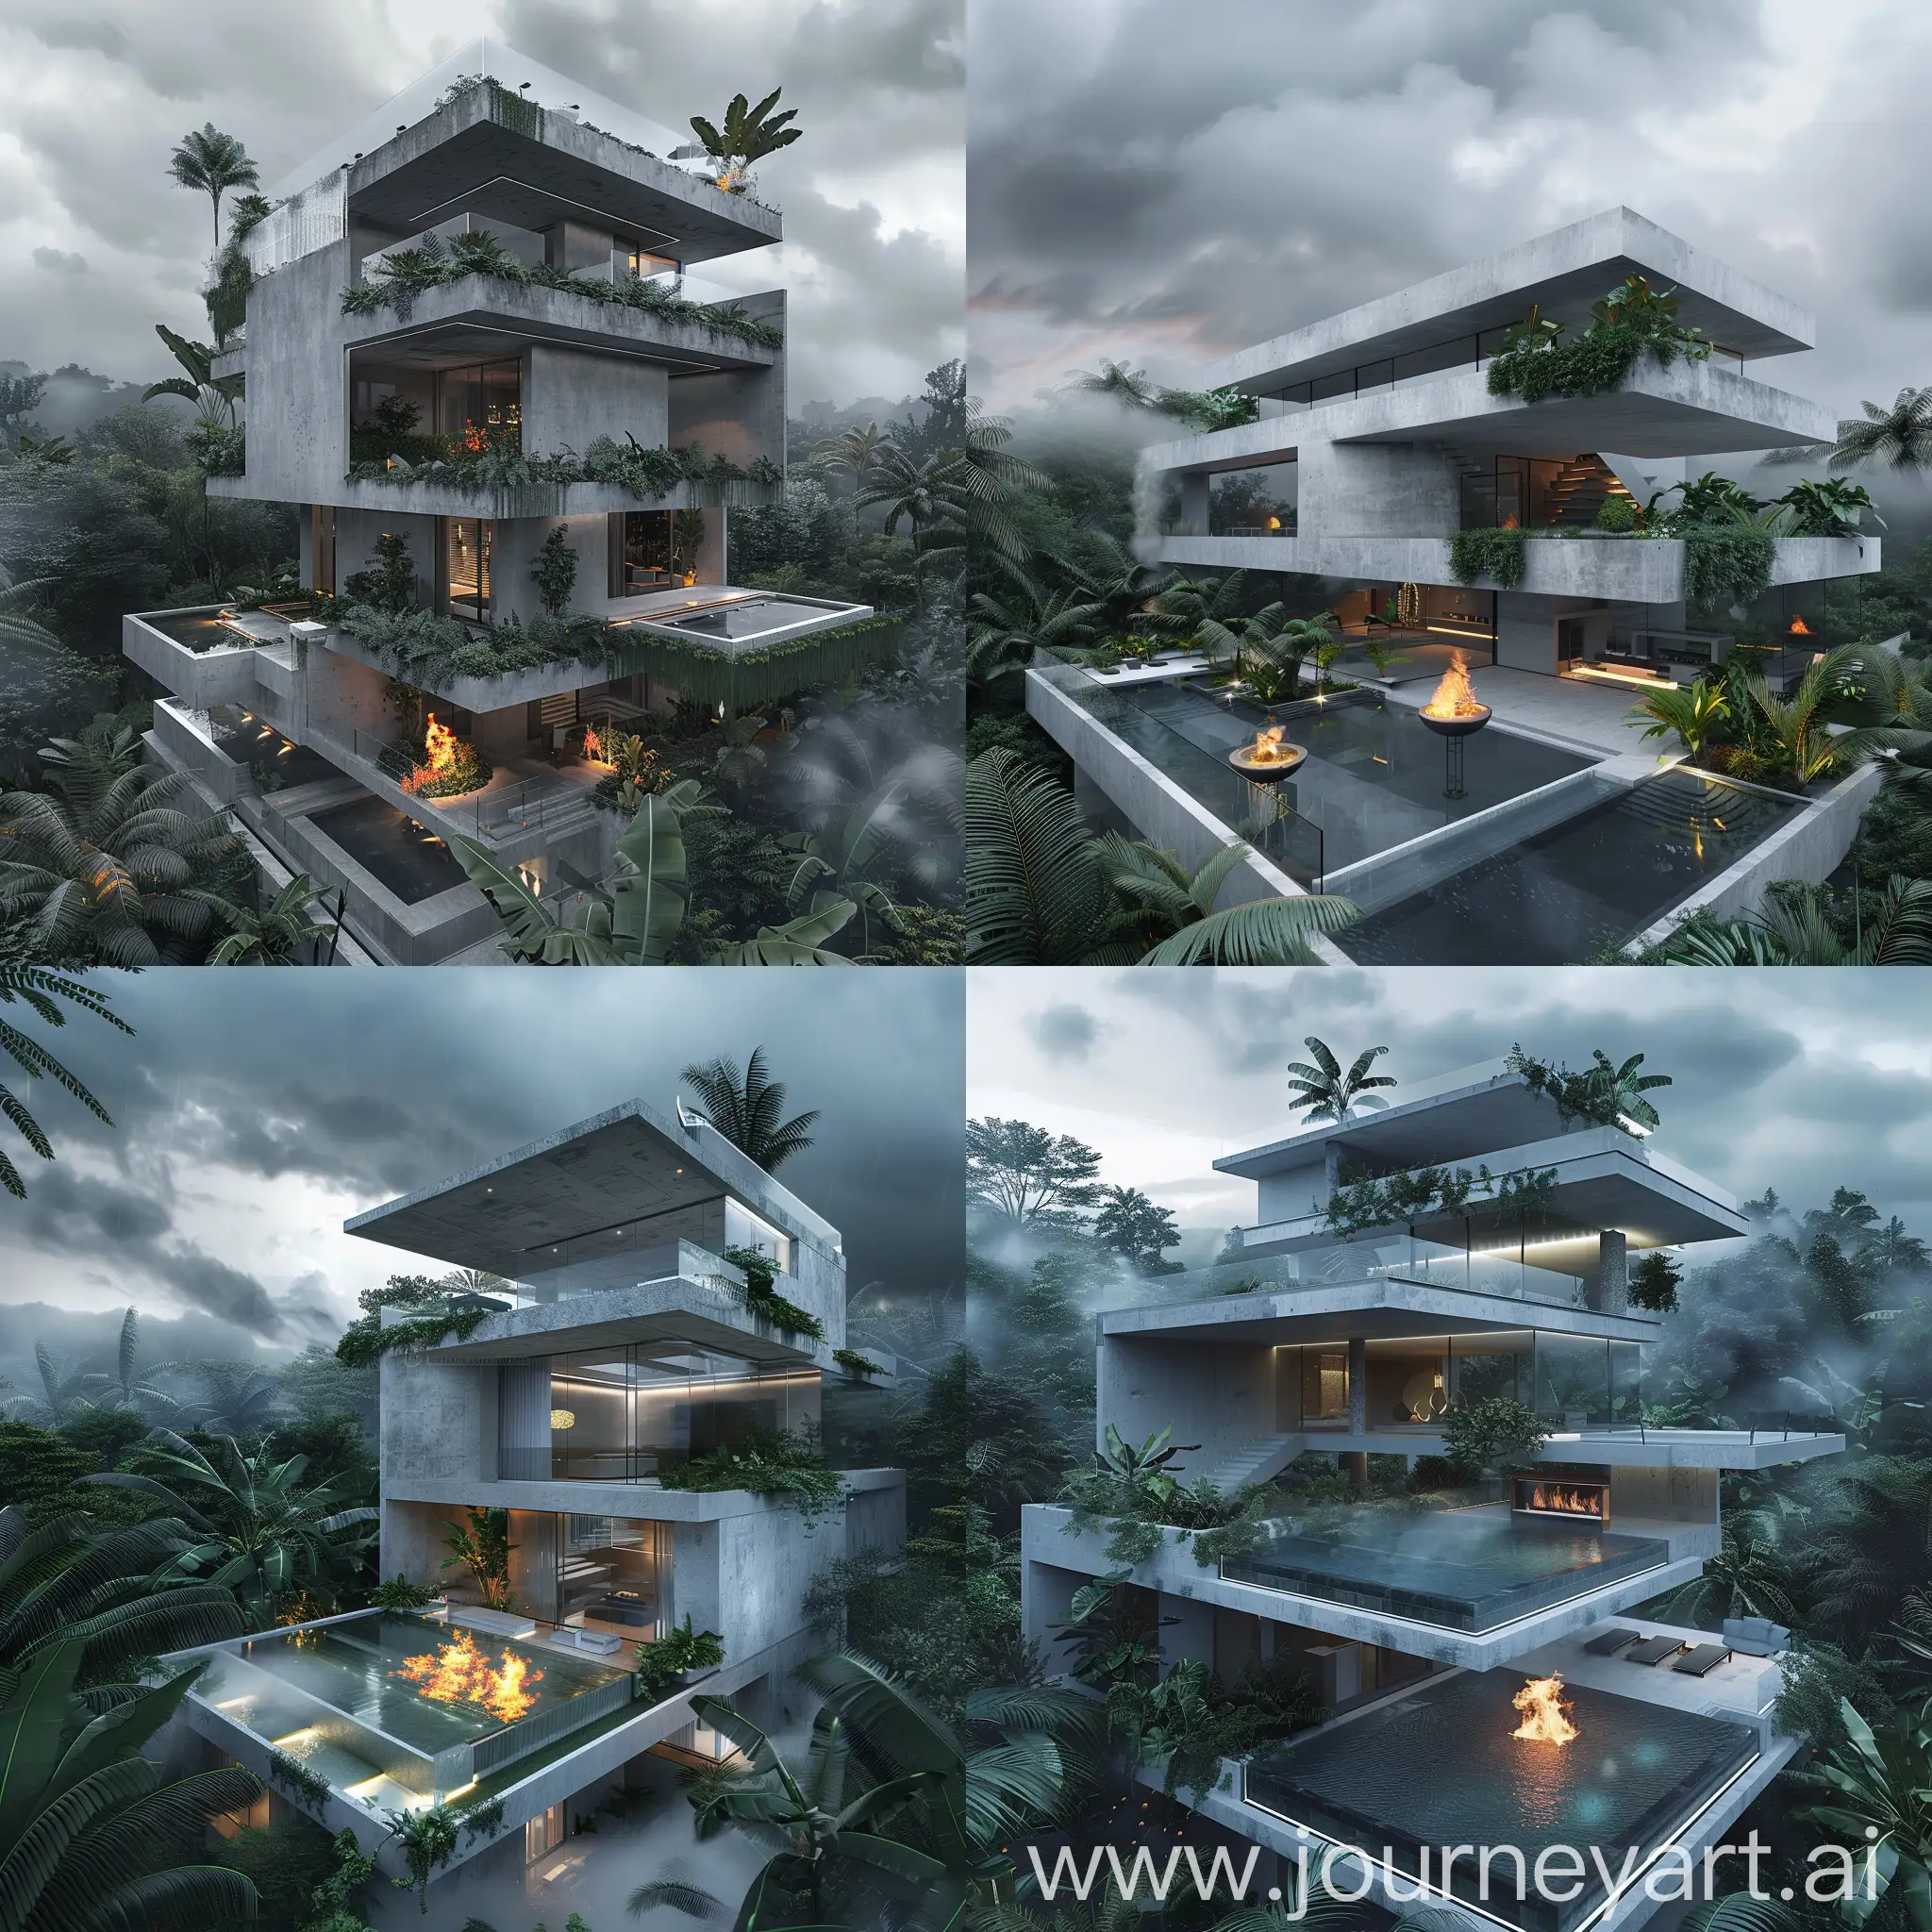 A three-story modern villa, with gray white color and concrete, with an infinity glass pool, landscaped and soft lighting, a fire temple, in the heights of a lush tropical forest and broad leaves, cloudy cloudy air, real photo